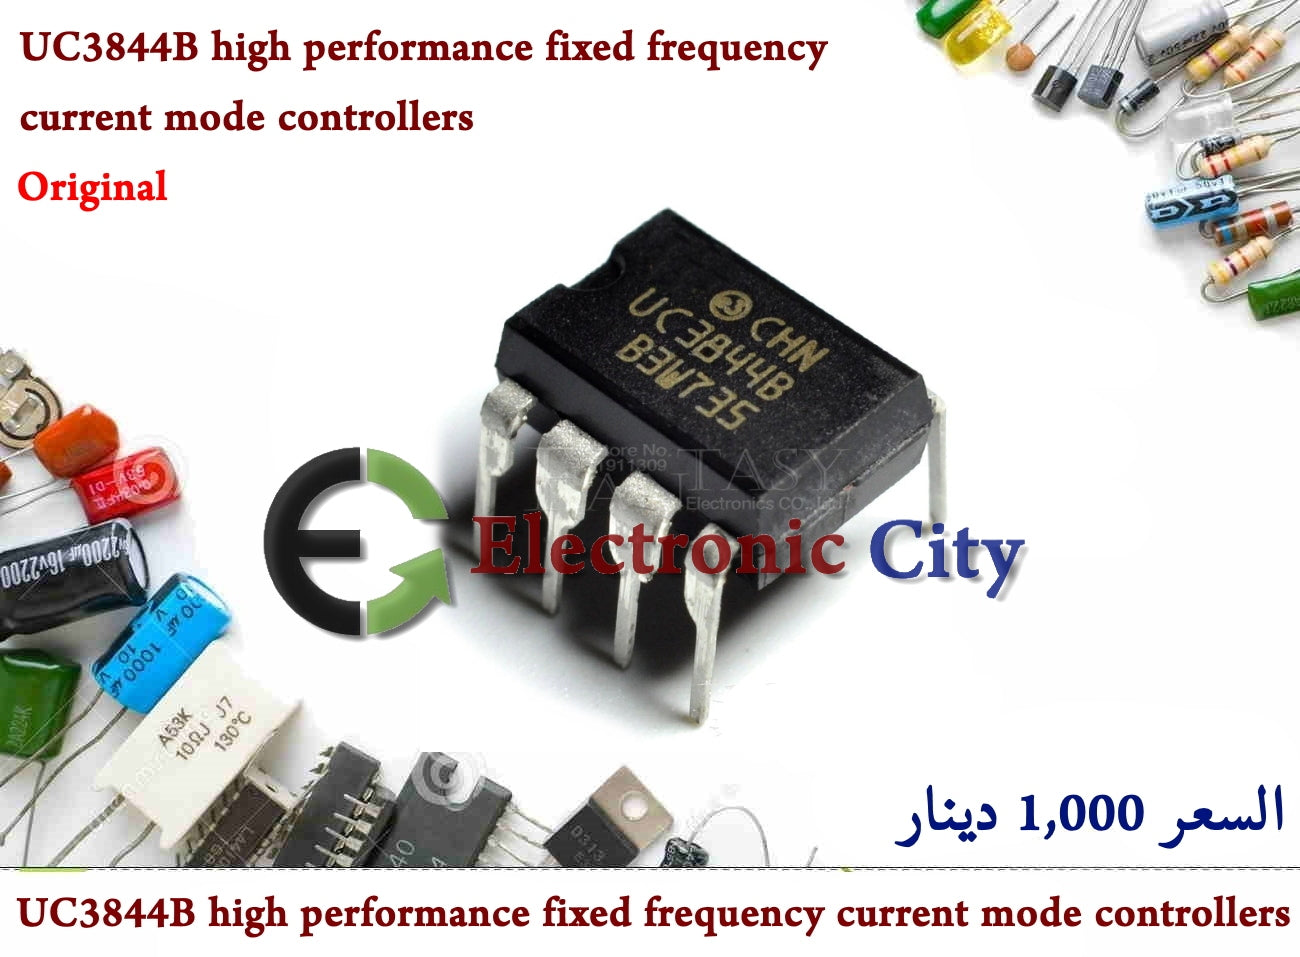 UC3844B high performance fixed frequency current mode controllers